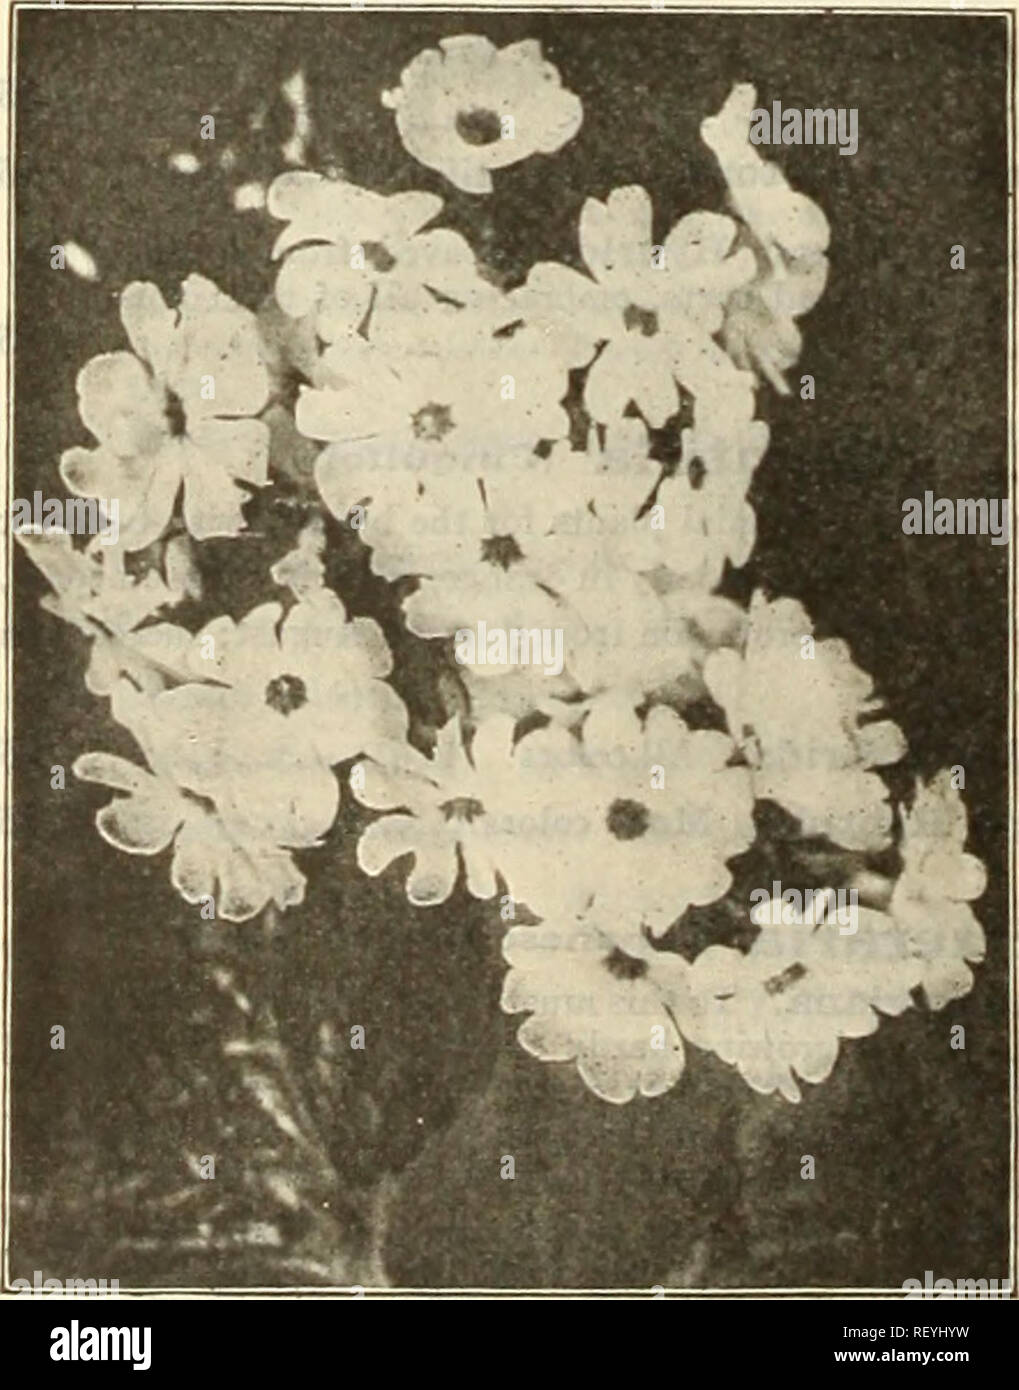 . Dreer's mid-summer list 1925. Flowers Seeds Catalogs; Vegetables Seeds Catalogs; Nurseries (Horticulture) Catalogs; Gardening Equipment and supplies Catalogs. 4. ^$js* Rosmarinus (Rosemary) 3895 Officinalis. An old favorite aromatic herb, delightfully fragrant, flowers light blue, grows about 2 feet high, should be planted in a warm dry situation, and given a little protection. J oz., 25 cts 10. Primula Obconica Grandiflora Dreer's &quot;Peerless&quot; Chinese Primroses Various Primroses PER PKT. 3824 Kewensis. This variety is most attractive, with pleas- ing bright yellow flowers borne on l Stock Photo